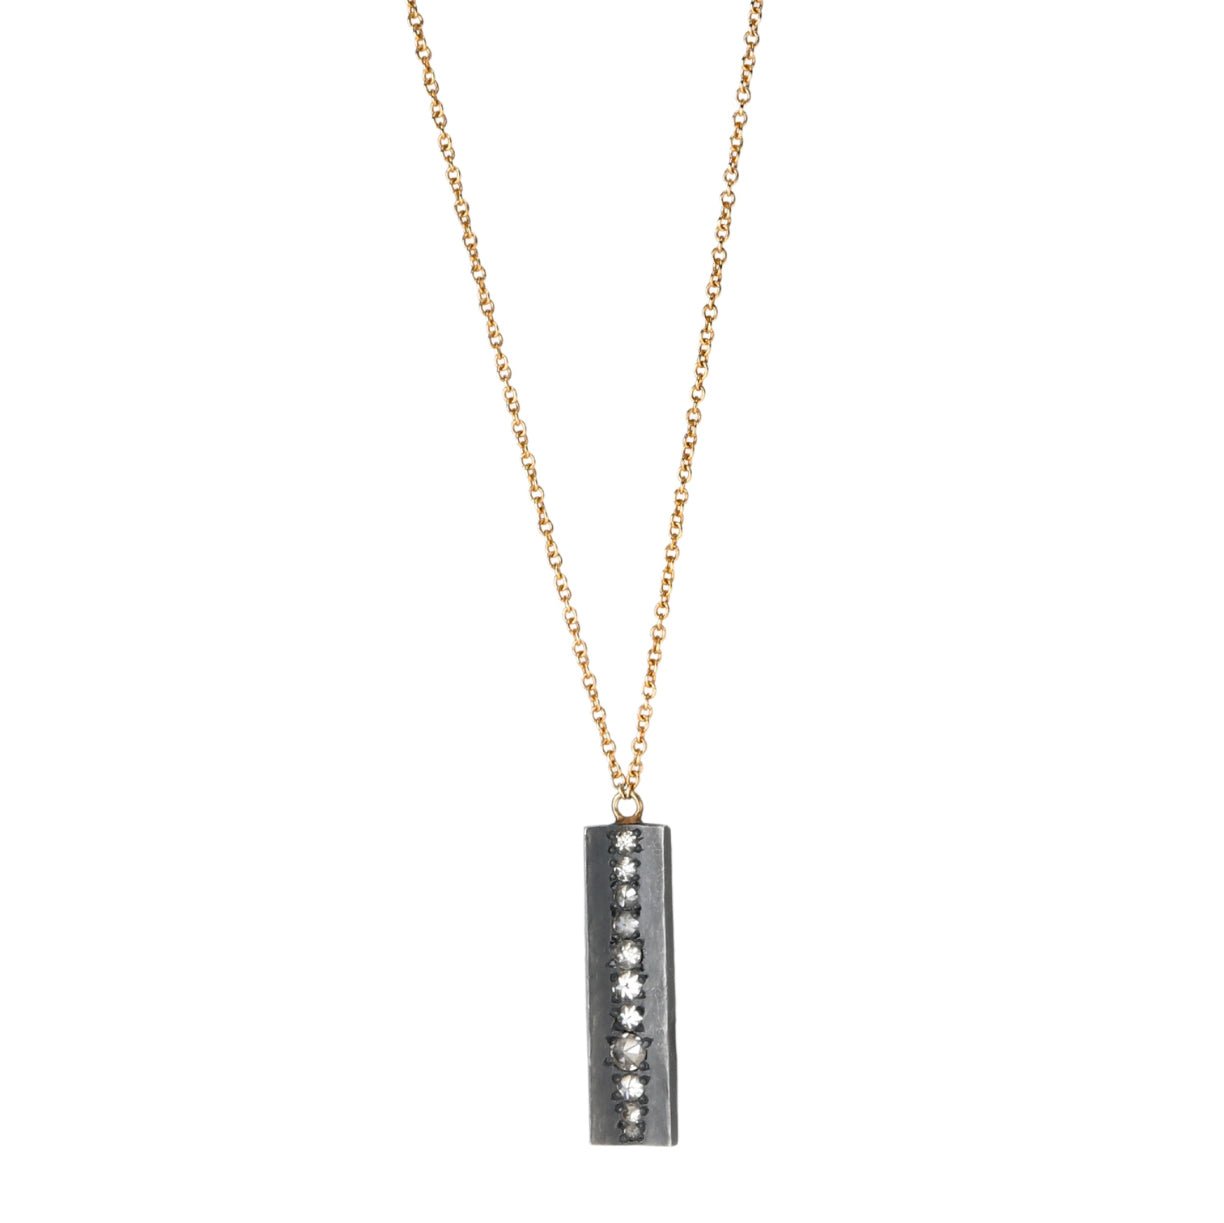 Blackened Rectangle Pendant Necklace with Inverted Diamonds - Peridot Fine Jewelry - TAP by Todd Pownell